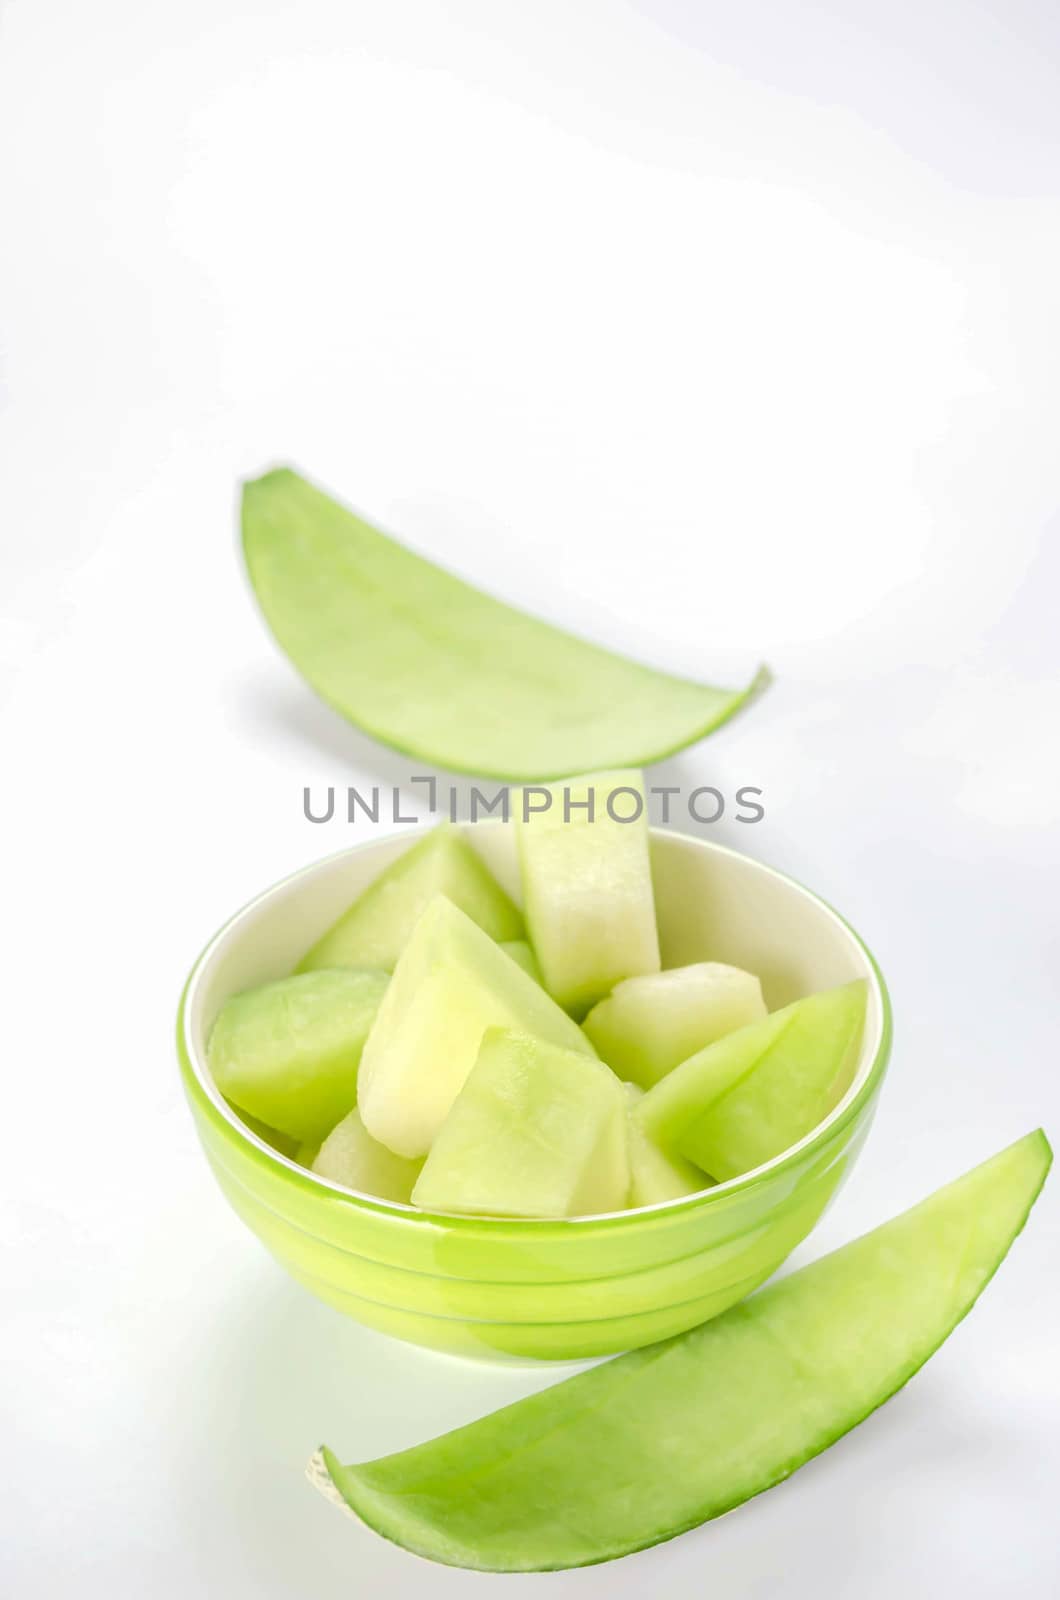 shopped green melon in bowl on white background